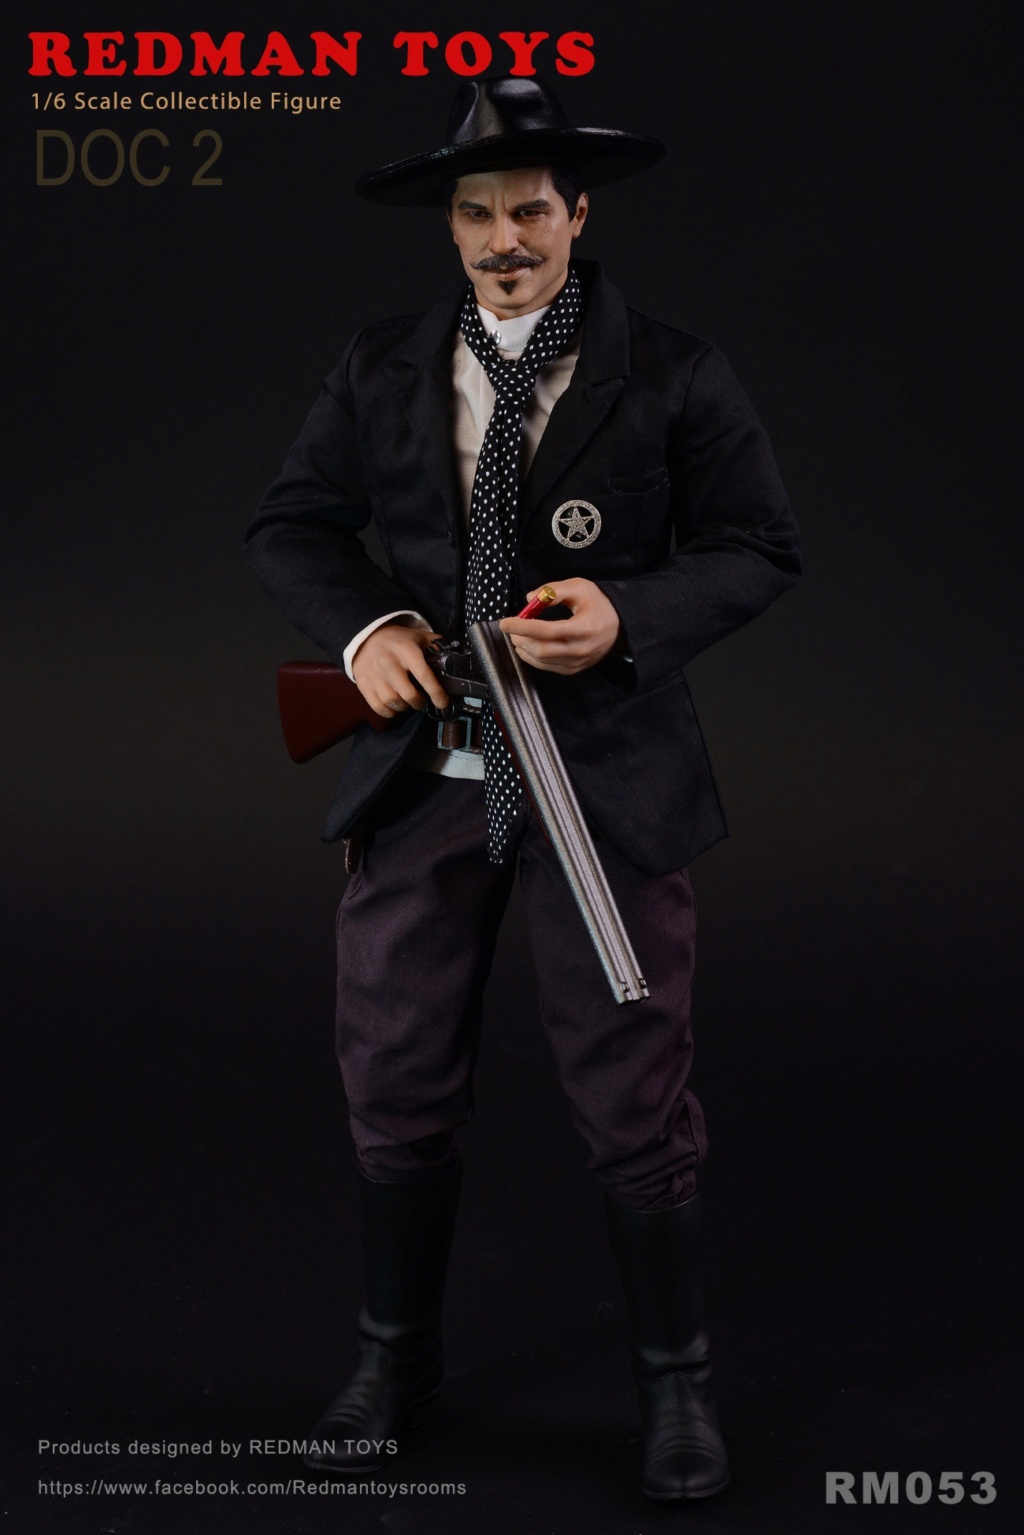 Doc - NEW PRODUCT: Redman Toys: 1/6 Tombstone Town-DOC 1, DOC 2, Town Marshal 02475310